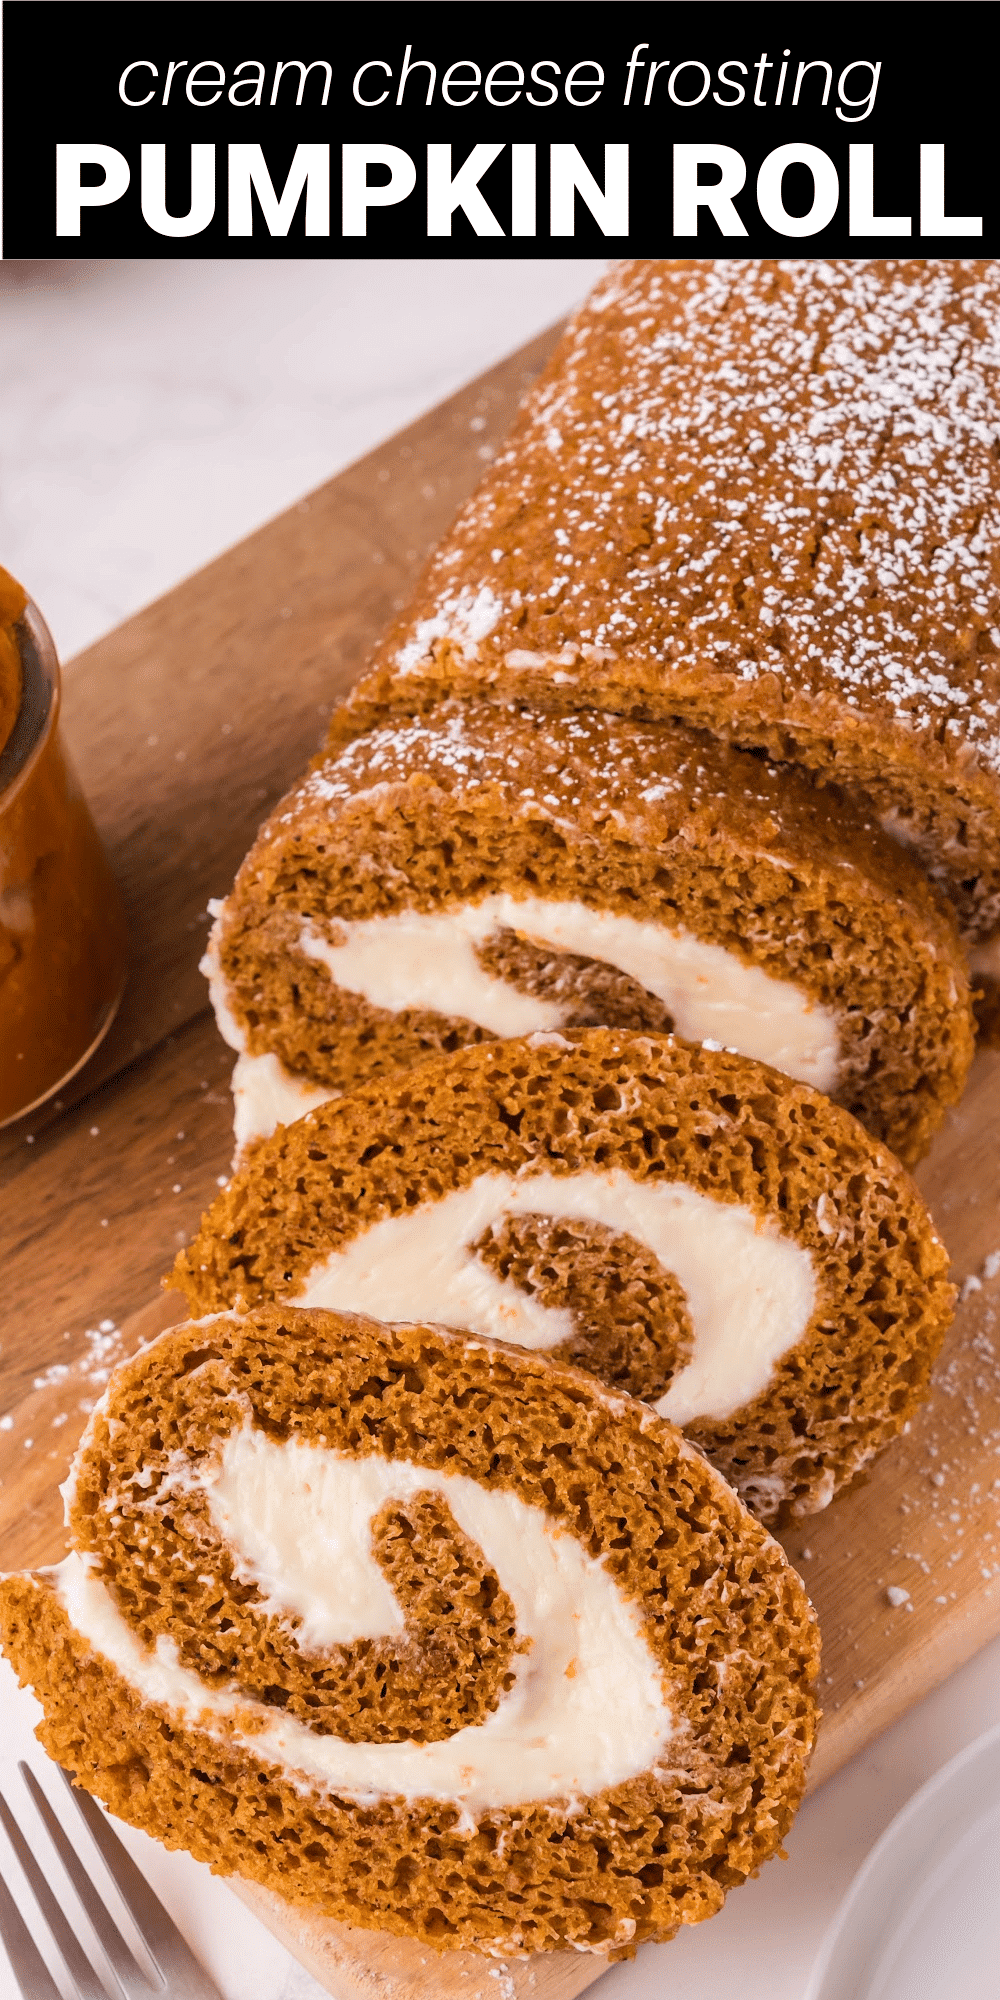 This sweet and delicious Pumpkin Roll recipe is the perfect dessert for the holidays or any of your fall celebrations. A from-scratch moist pumpkin sheet cake is rolled up with a rich and decadent cream cheese filling and topped with a delicate dusting of powdered sugar for an amazing show-stopping presentation.